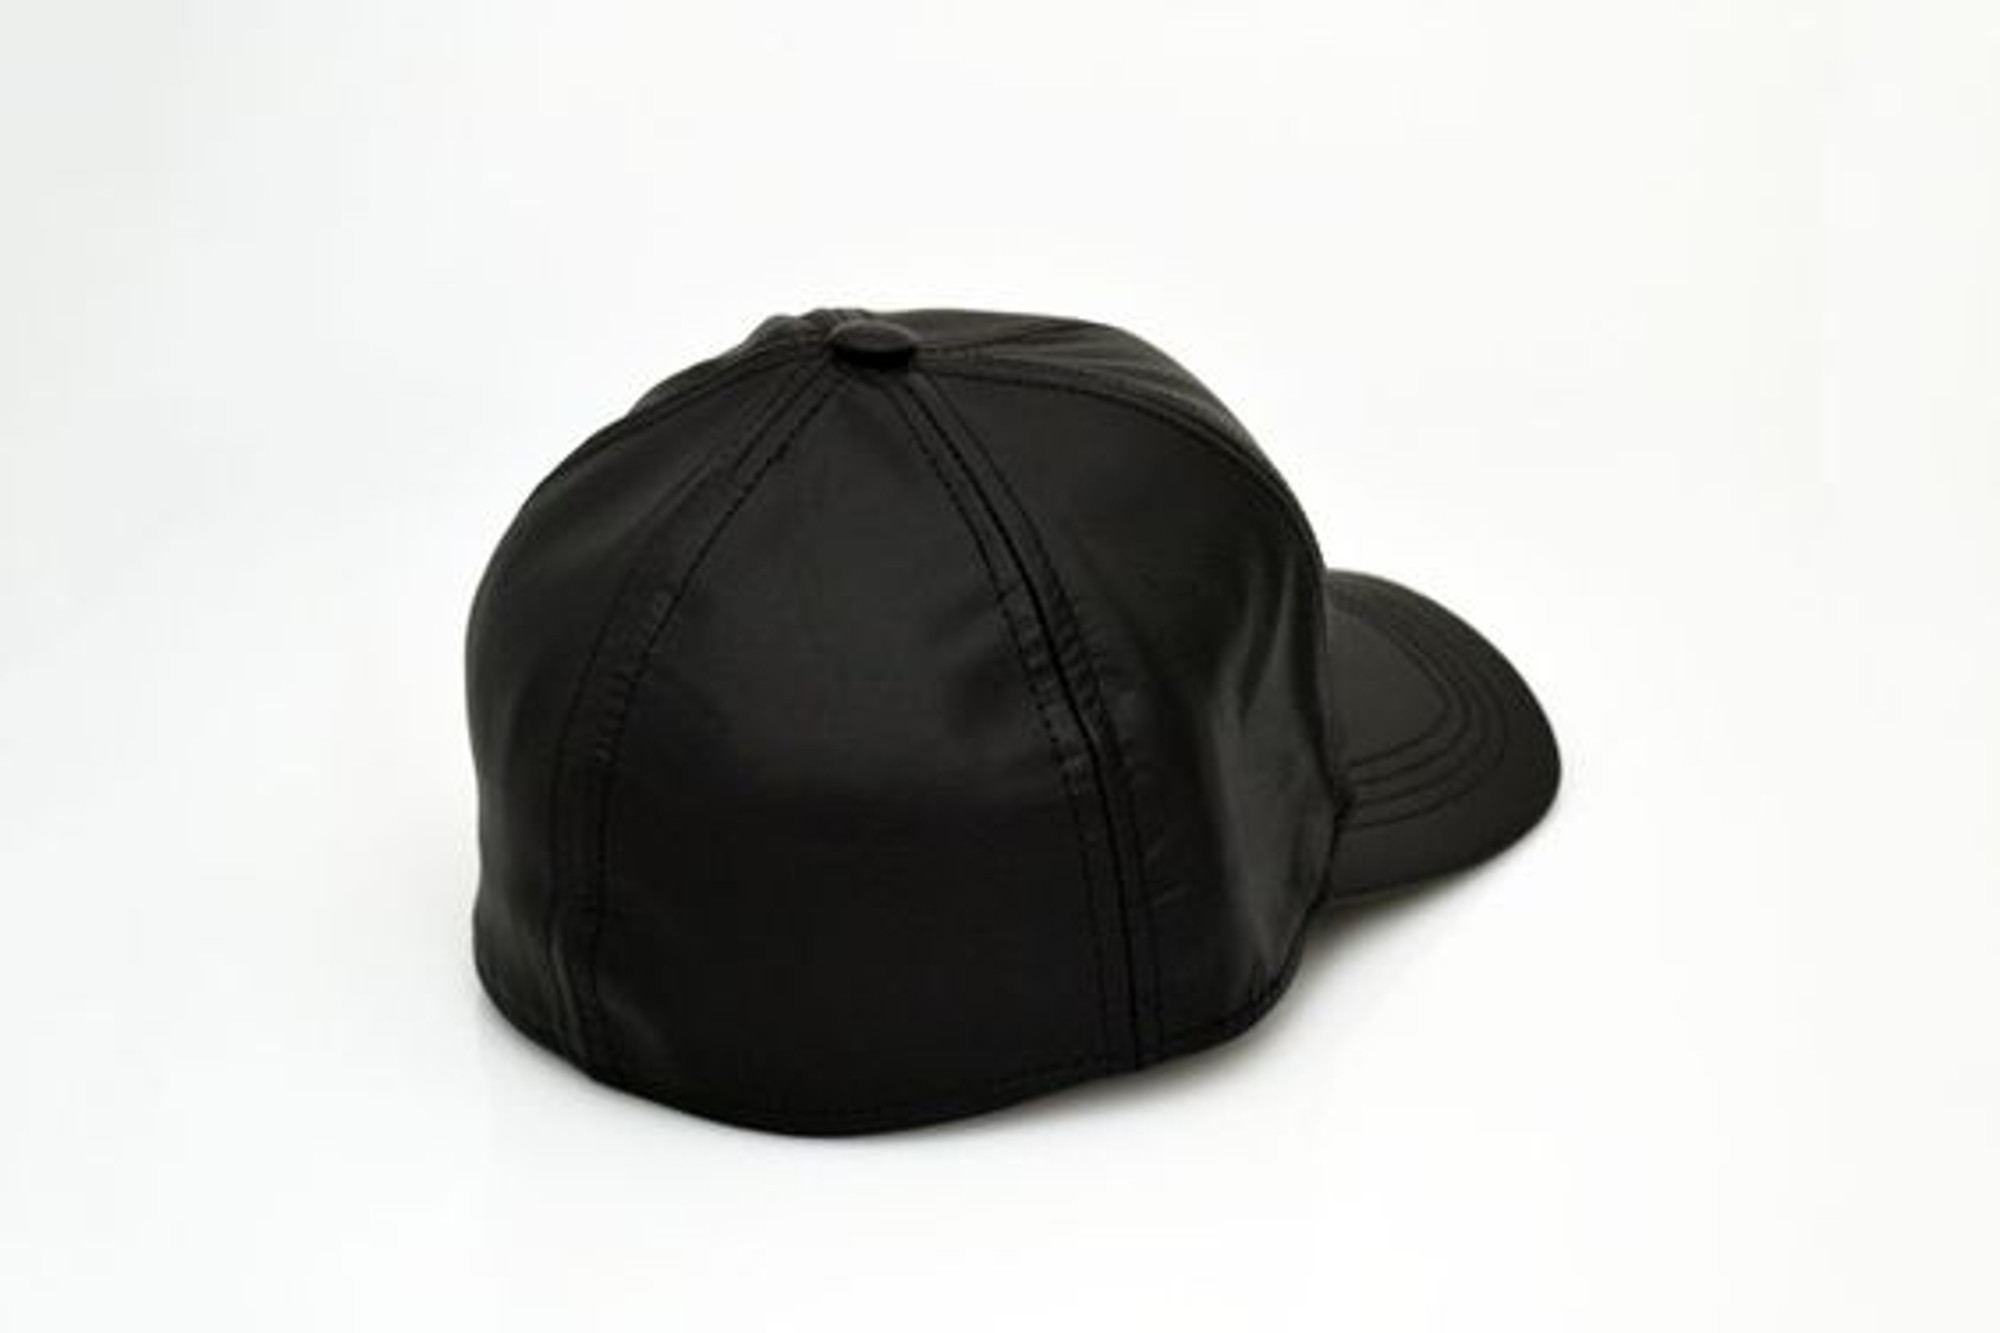 Leather Baseball Cap Fitted Made in USA